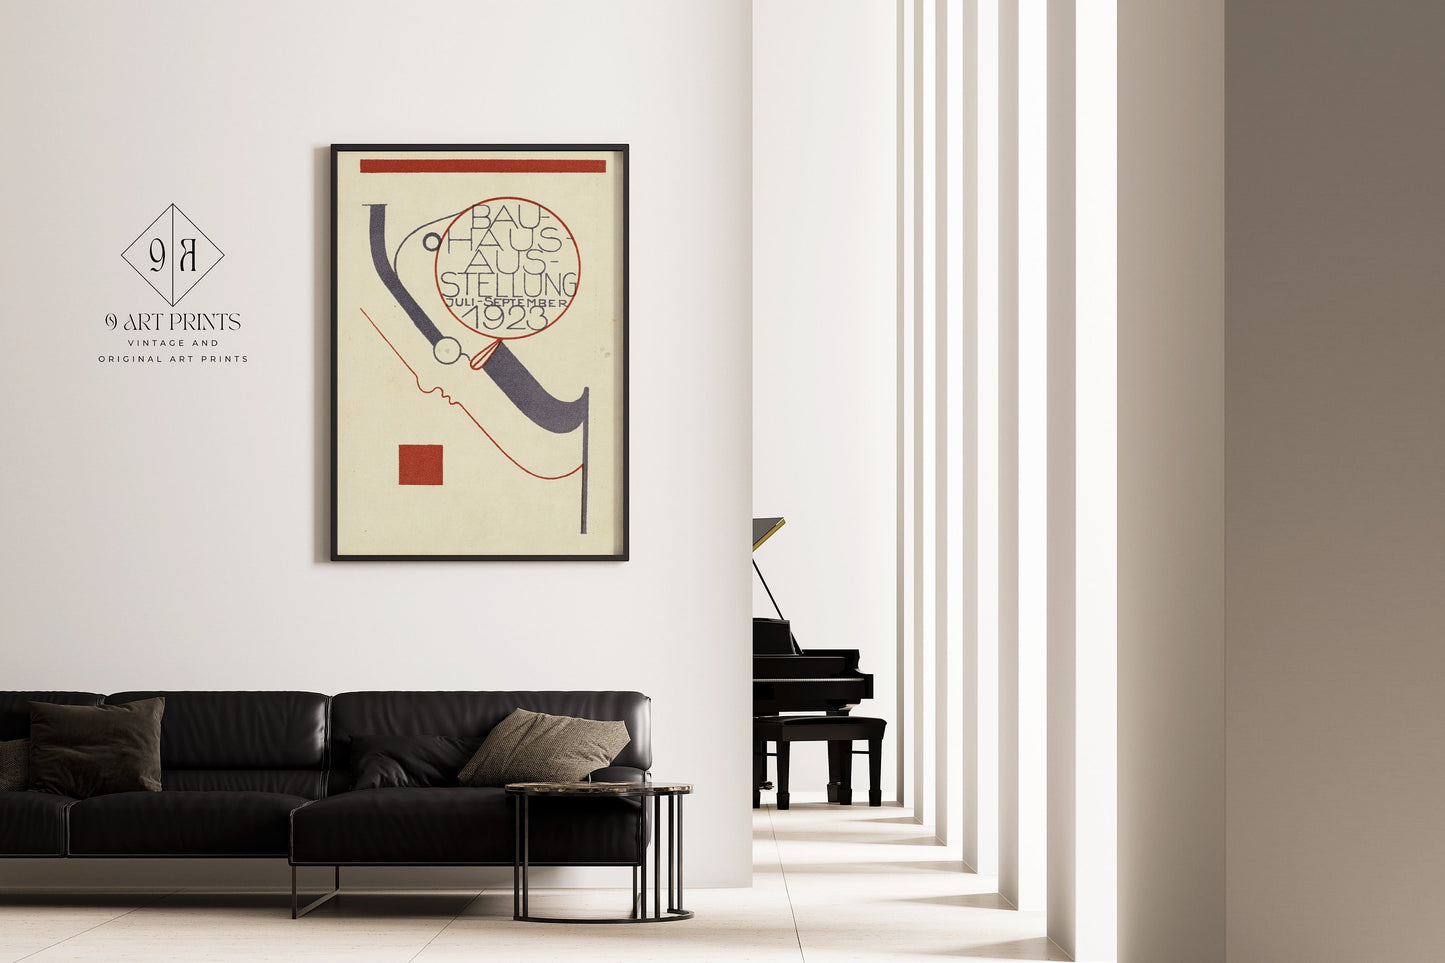 Bauhaus Vintage Ausstellung Poster Spectacles Mid-Century Modern Art Print 60s Vintage Museum Minimalist Abstract Ready to hang Framed Decor